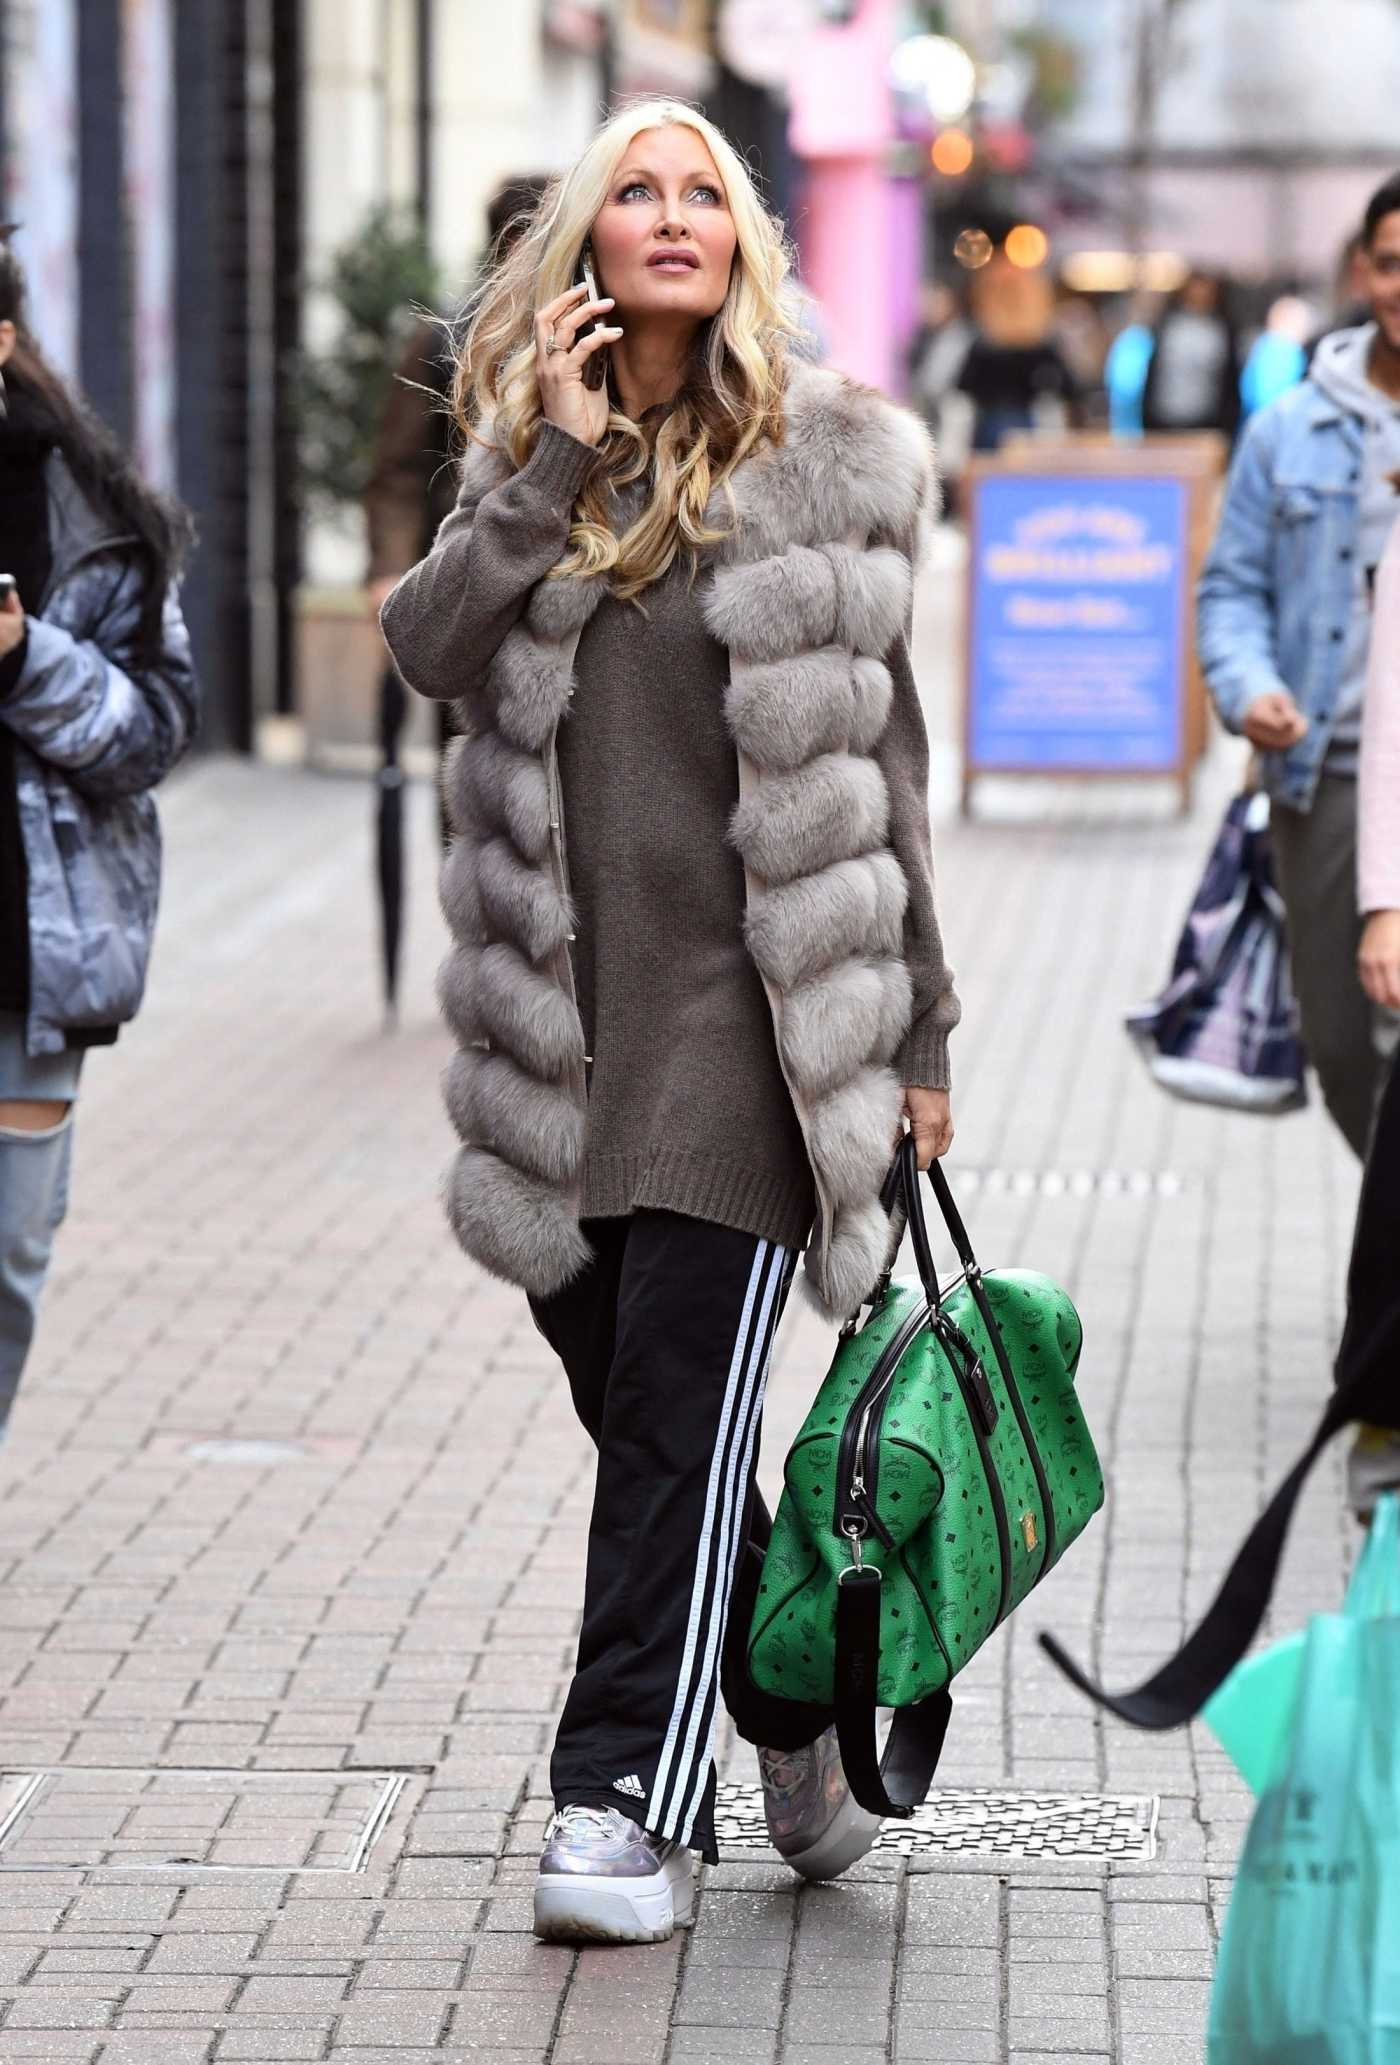 Caprice Bourret in a Black Adidas Track Pants Was Seen Out in London 04/12/2021